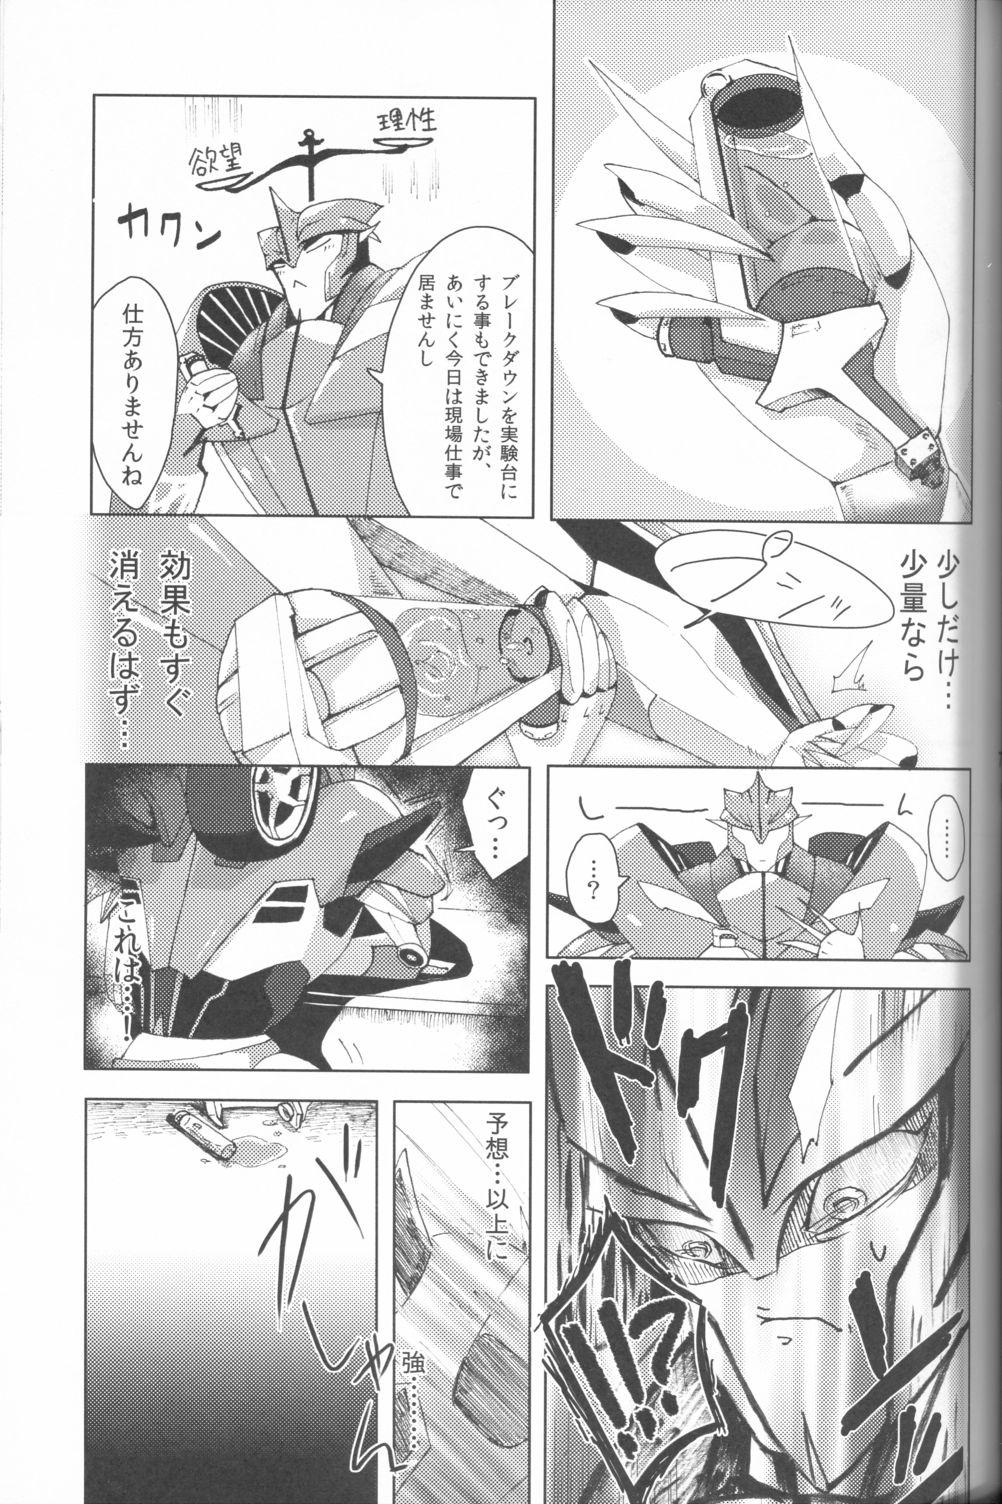 Skirt Knock x Knock - Transformers Pussy Licking - Page 6